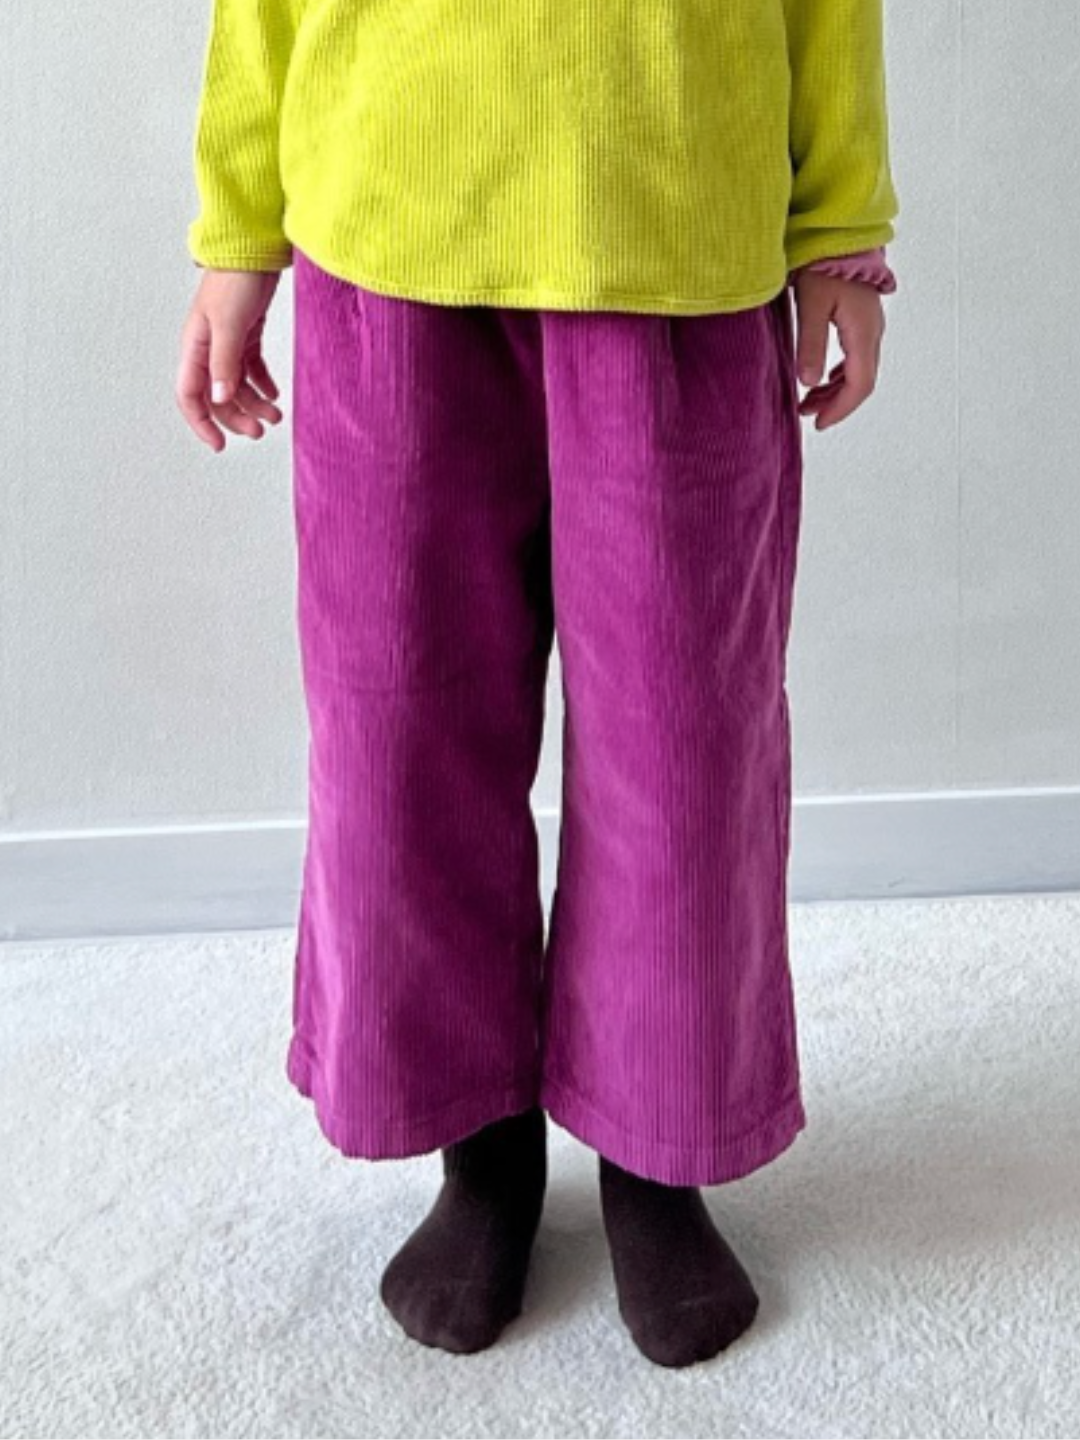 Waist-down cropped image of a child wearing wide-leg corduroy pants in magenta pink, paired with a yellow shirt and dark brown socks, standing on grey carpet..